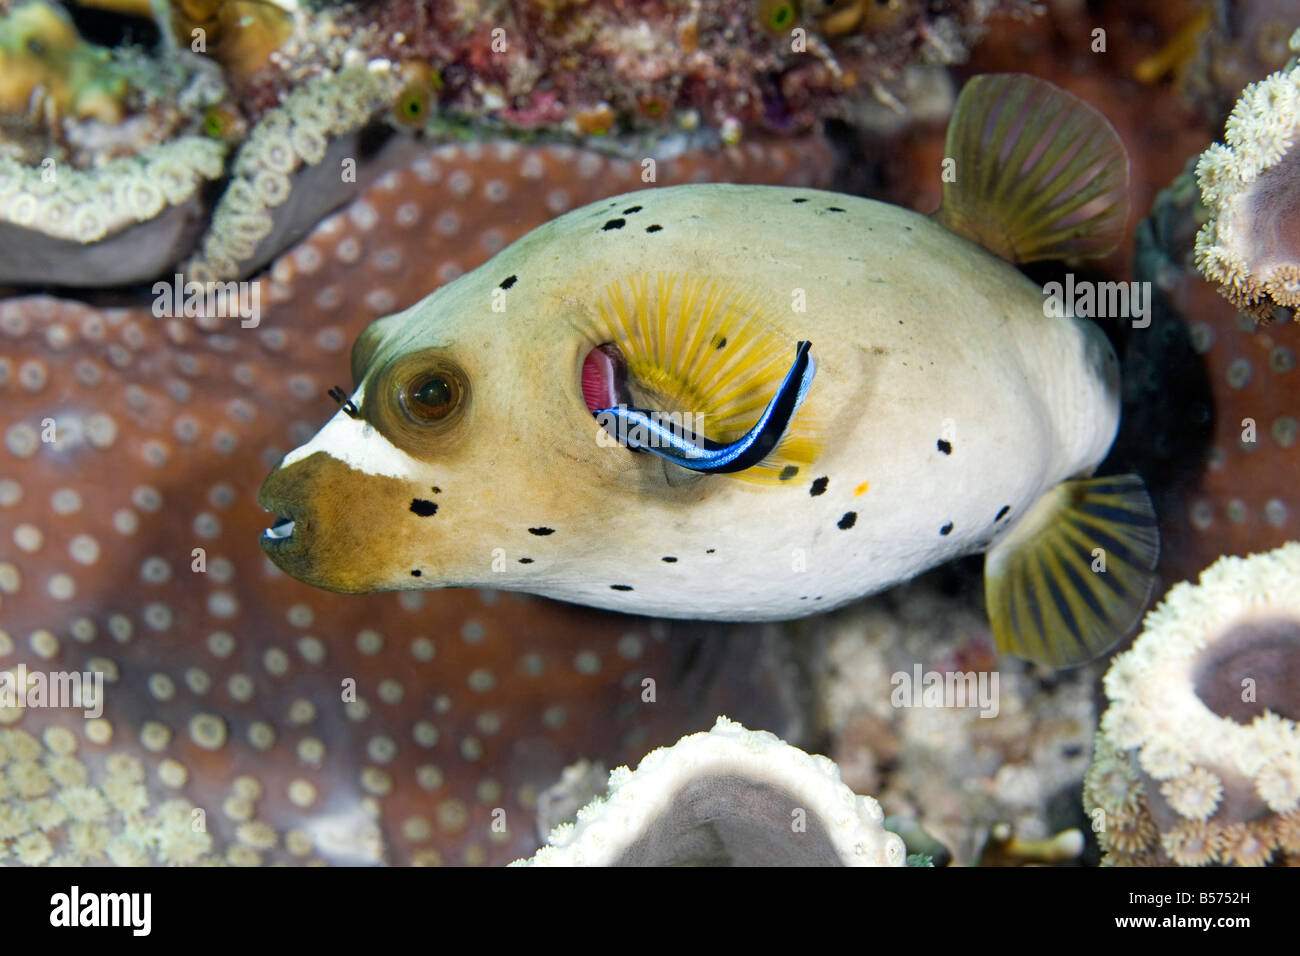 Black Spotted pufferfish, Arothron nigropunctatus, having its gills cleaned by a Blue Streak Cleaner Wrasse, Labroides dimidiatus Stock Photo